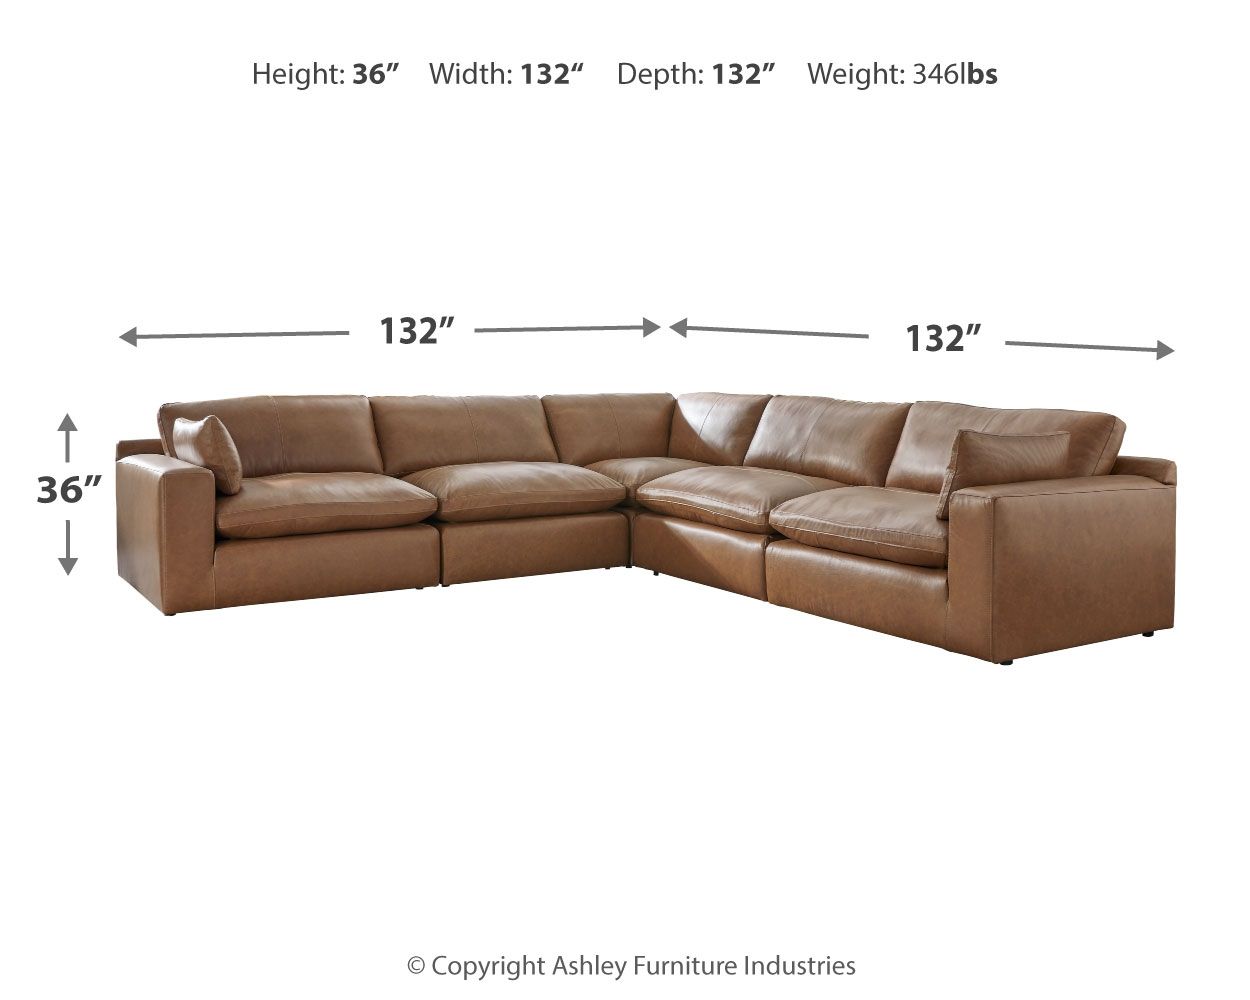 Emilia Caramel Brown Leather Sectional - Plush Cushions, Top-Grain-Stationary Sectionals-American Furniture Outlet